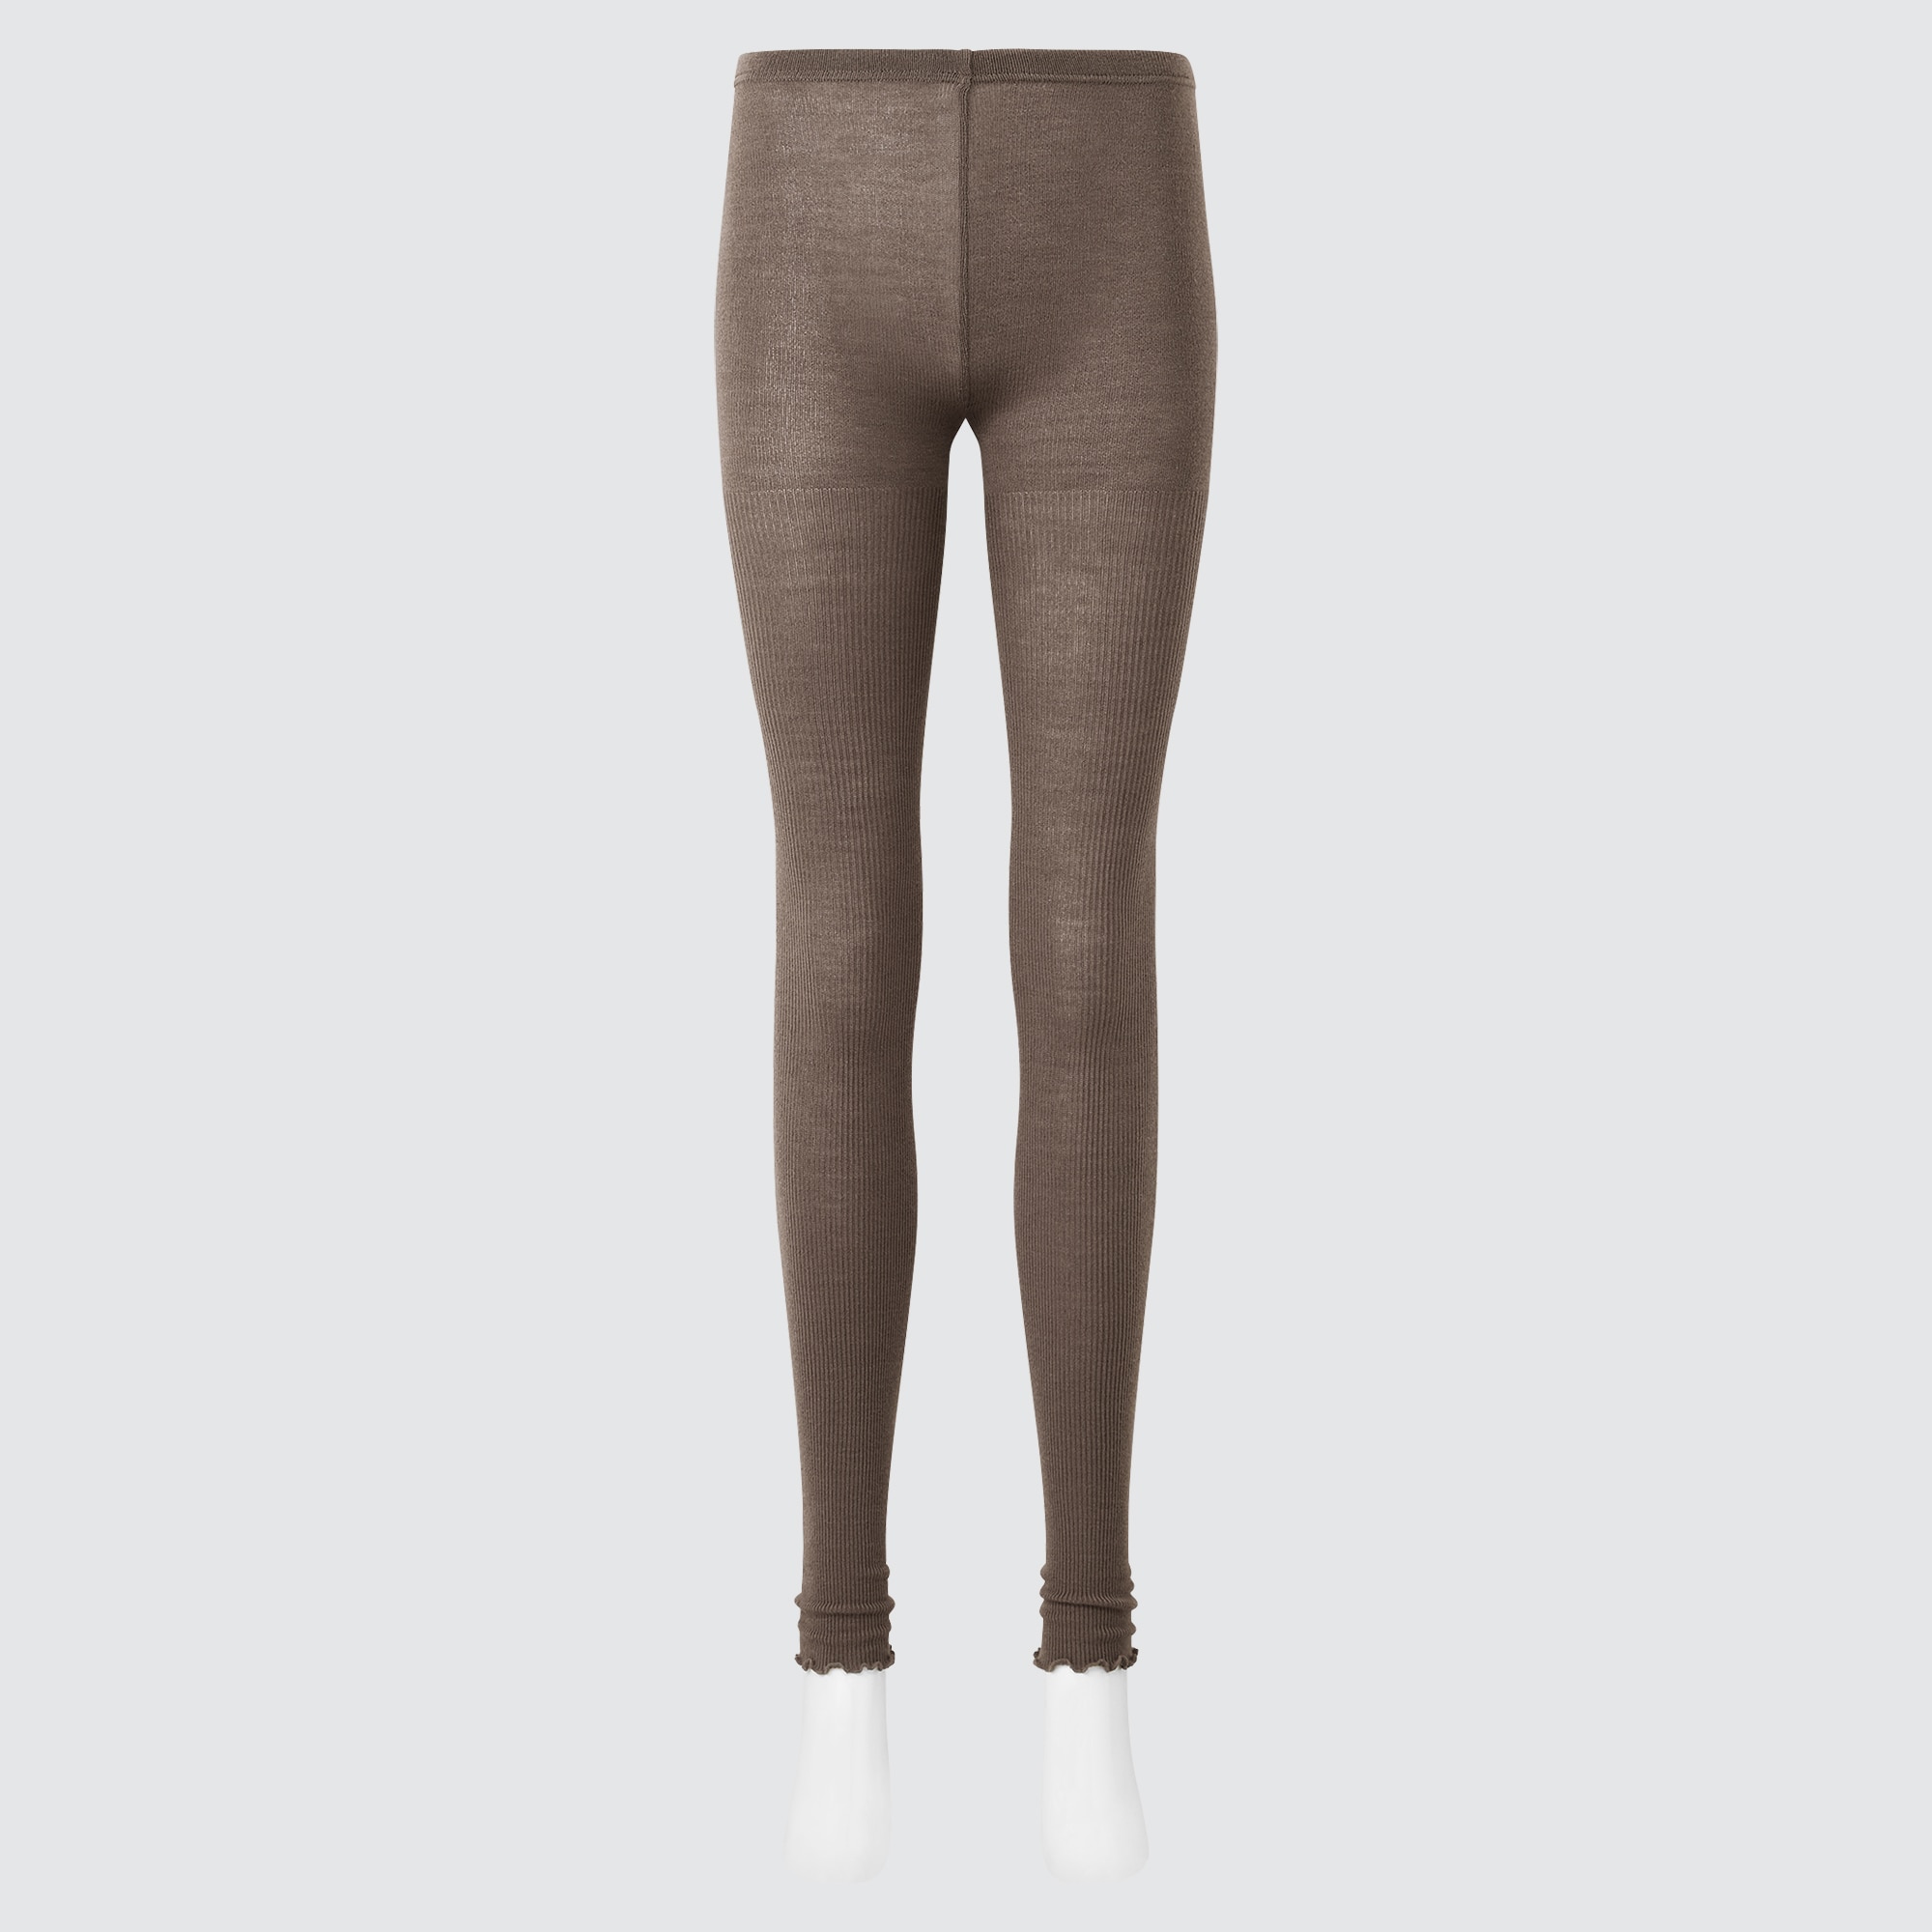 Uniqlo Heat Tech Extra Warm Leggings Cream White High Waist Knit Pull On  Winter - $23 - From Twisted